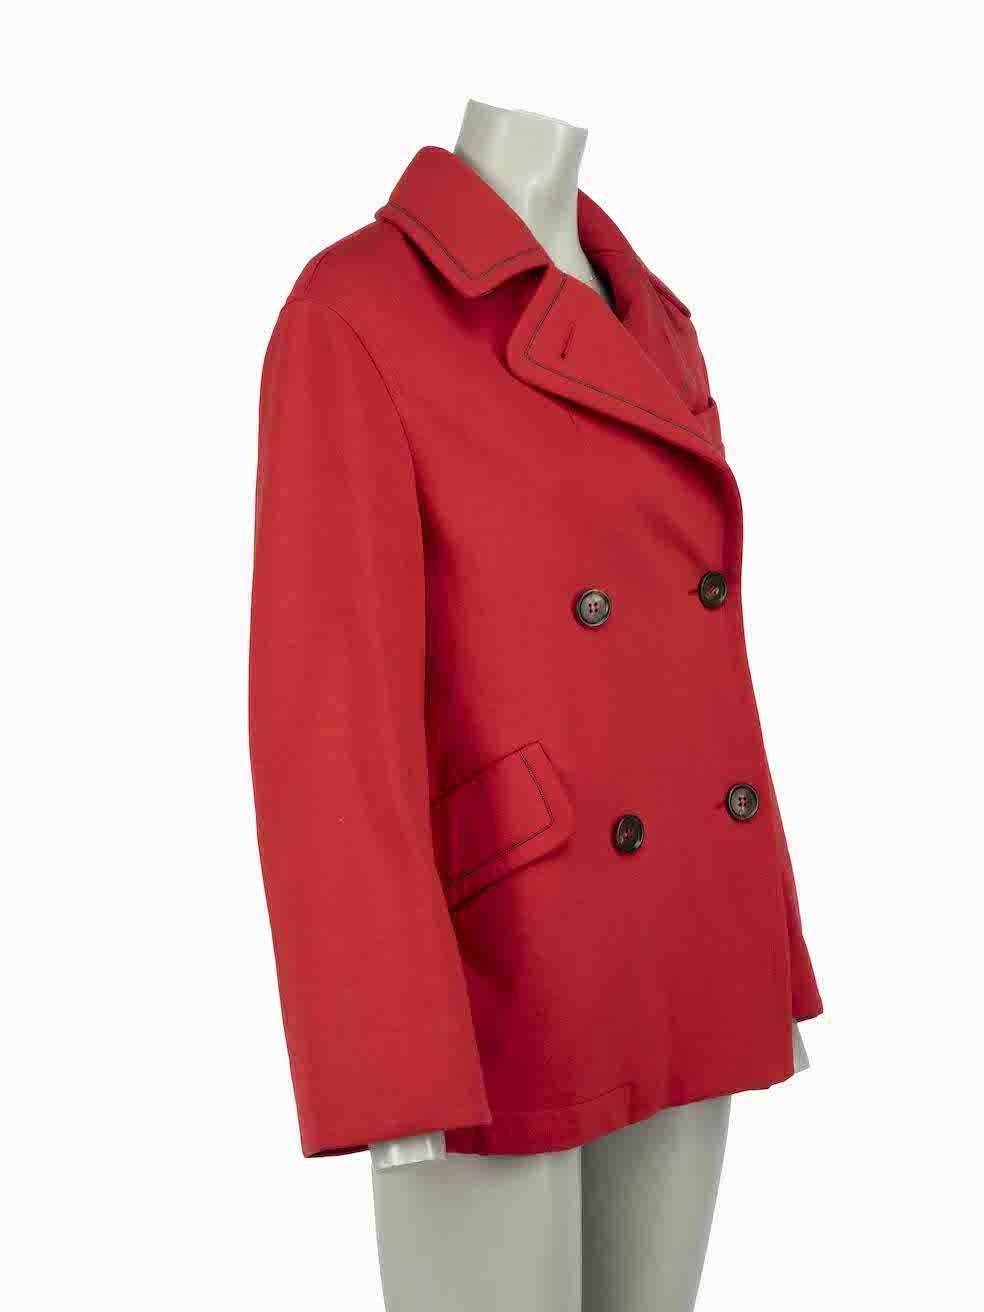 CONDITION is Very good. Minimal wear to coat is evident. Minimal wear to the rear with mark above the hem on this used Brunello Cucinelli designer resale item.
 
Details
Red
Cotton
Short length peacoat
Double breasted
Beads accent
2x Front side